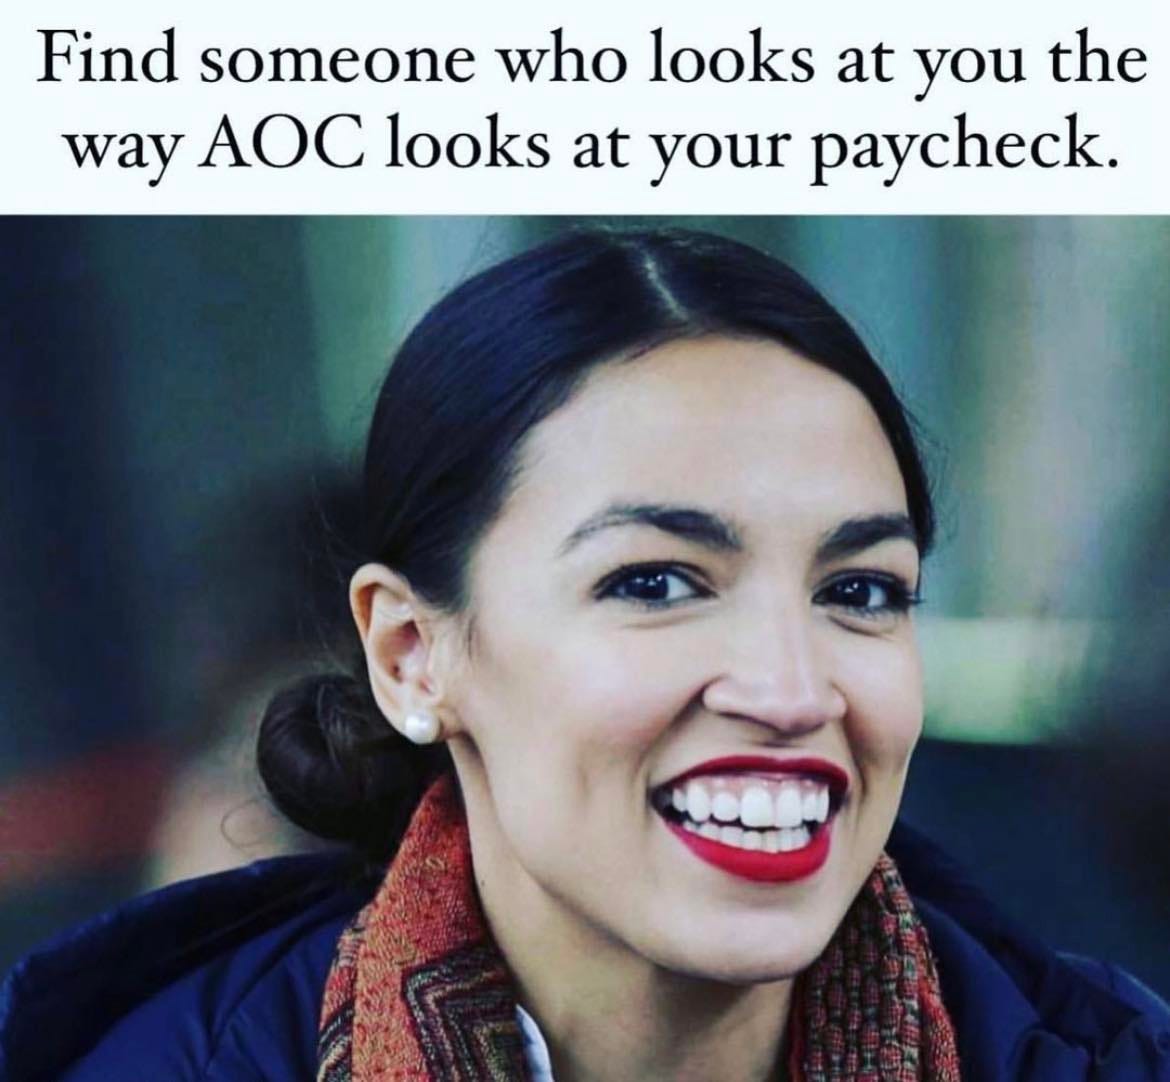 May be an image of 1 person and text that says 'Find someone who looks at you the way AOC looks at your paycheck.'